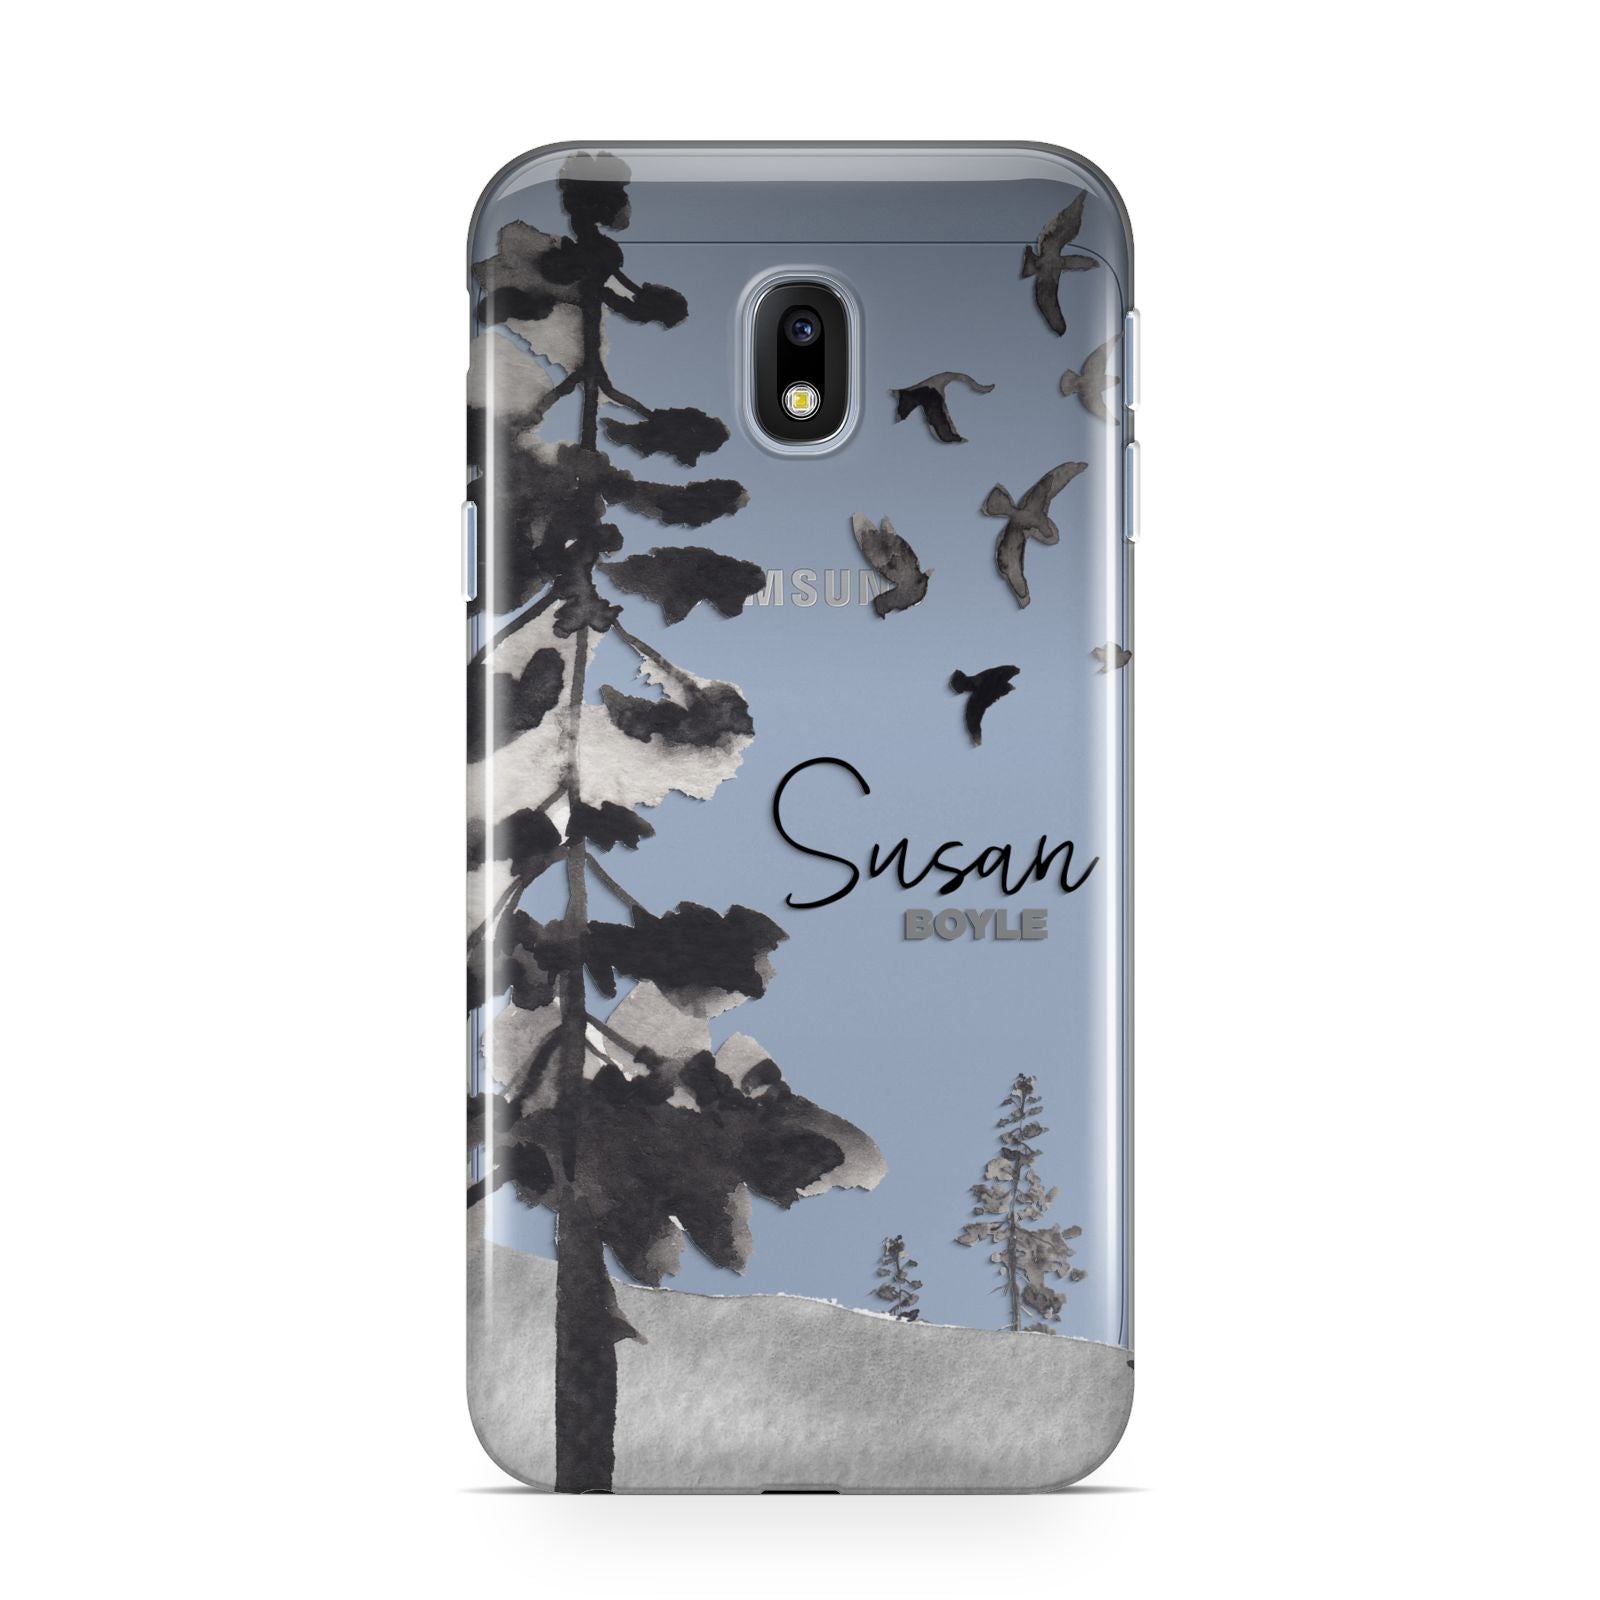 Personalised Monochrome Forest Samsung Galaxy J3 2017 Case